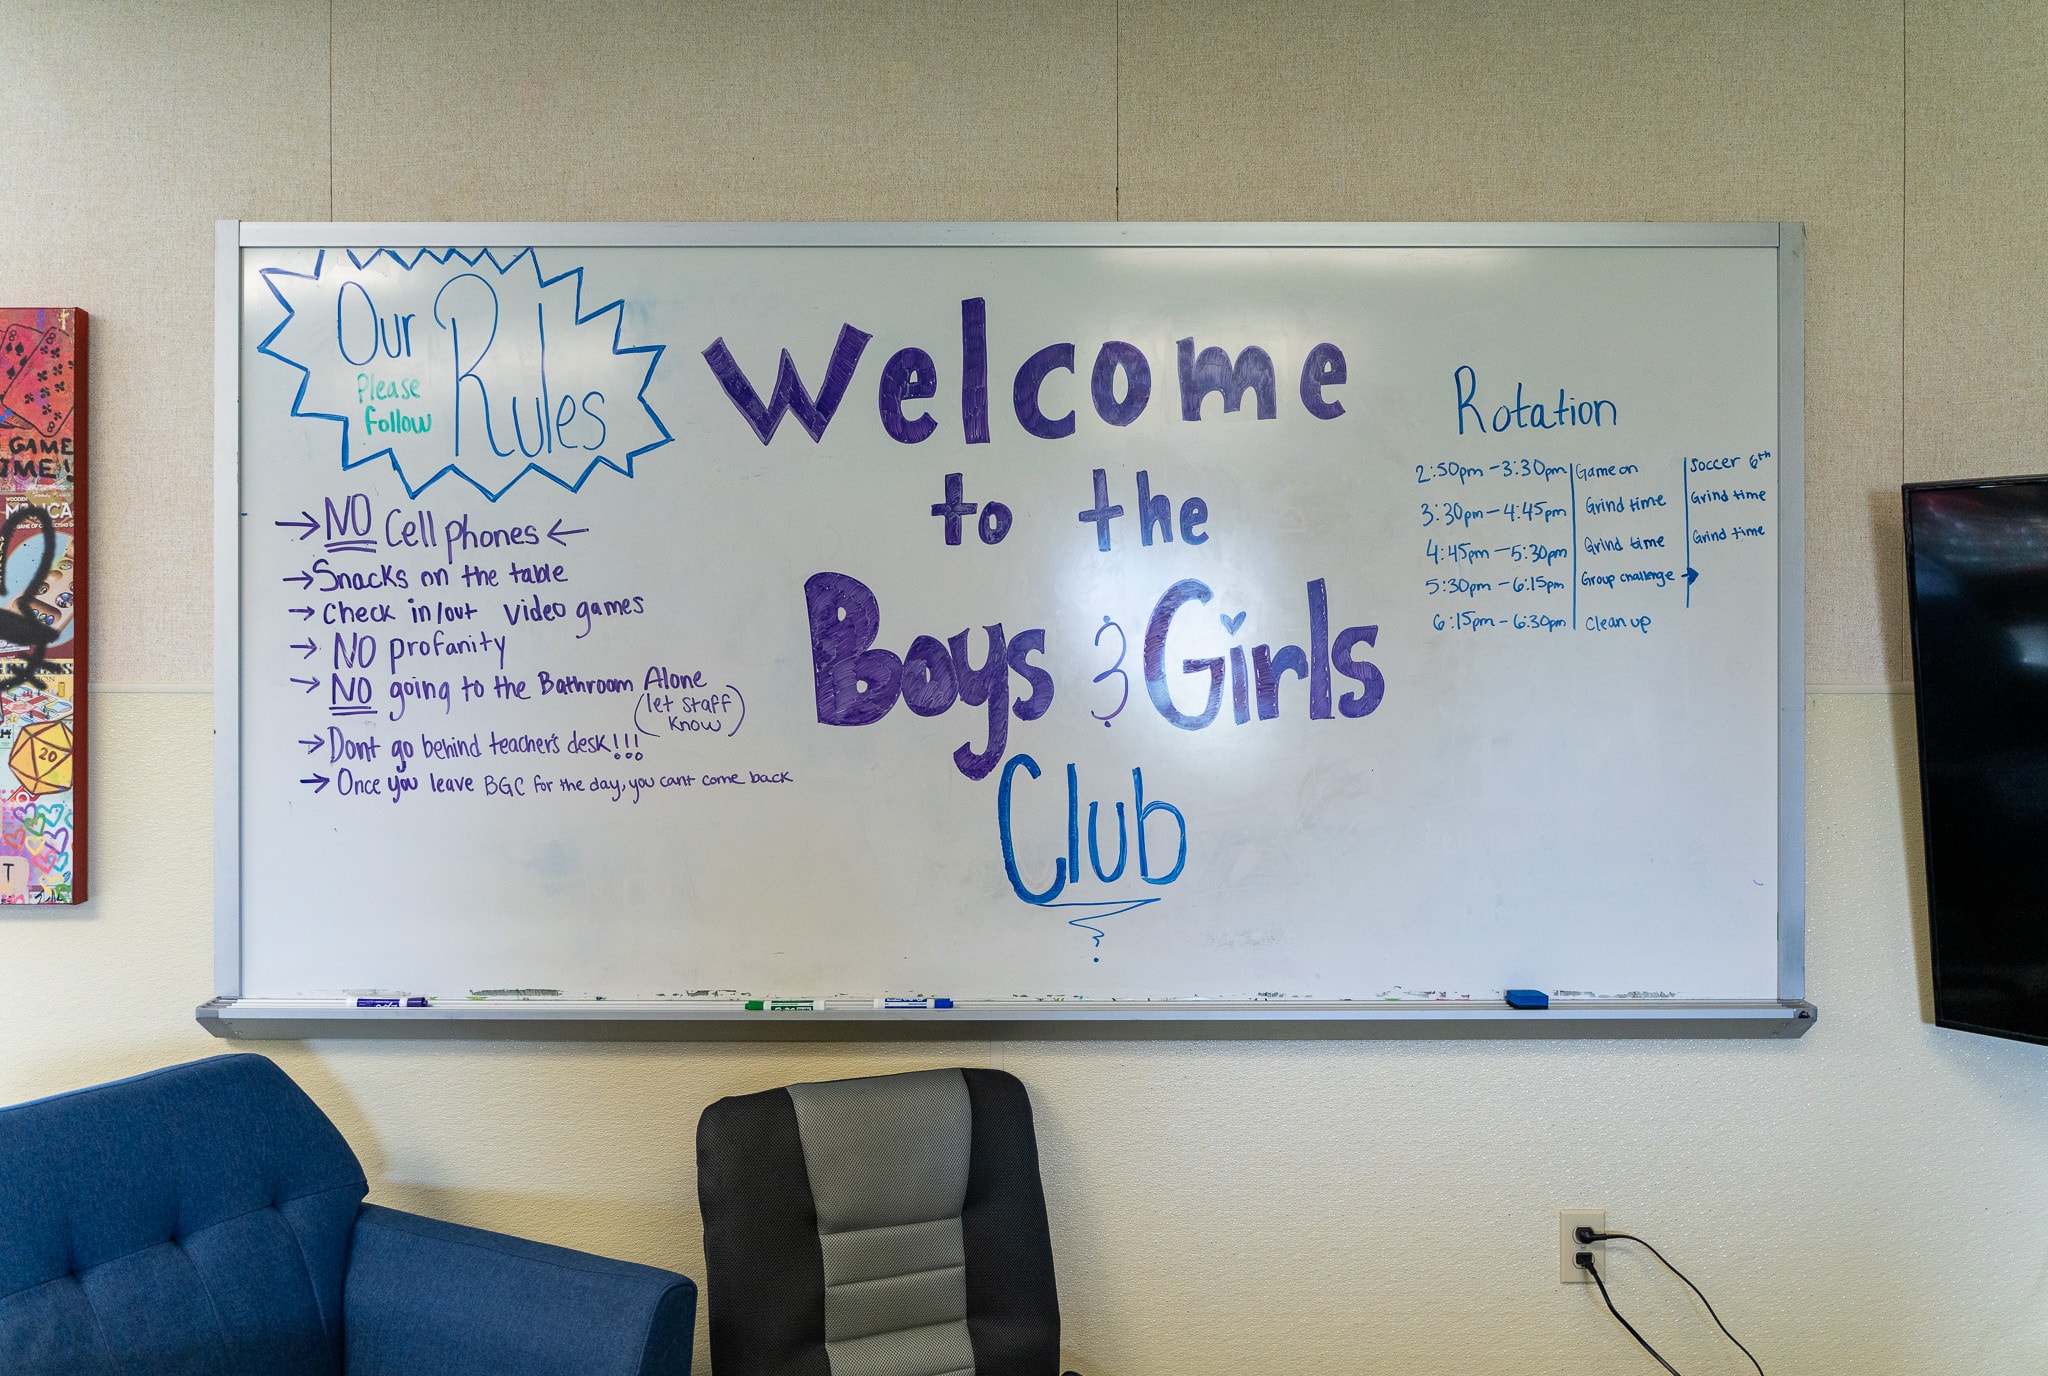 Welcome to the Boys & Girls Club